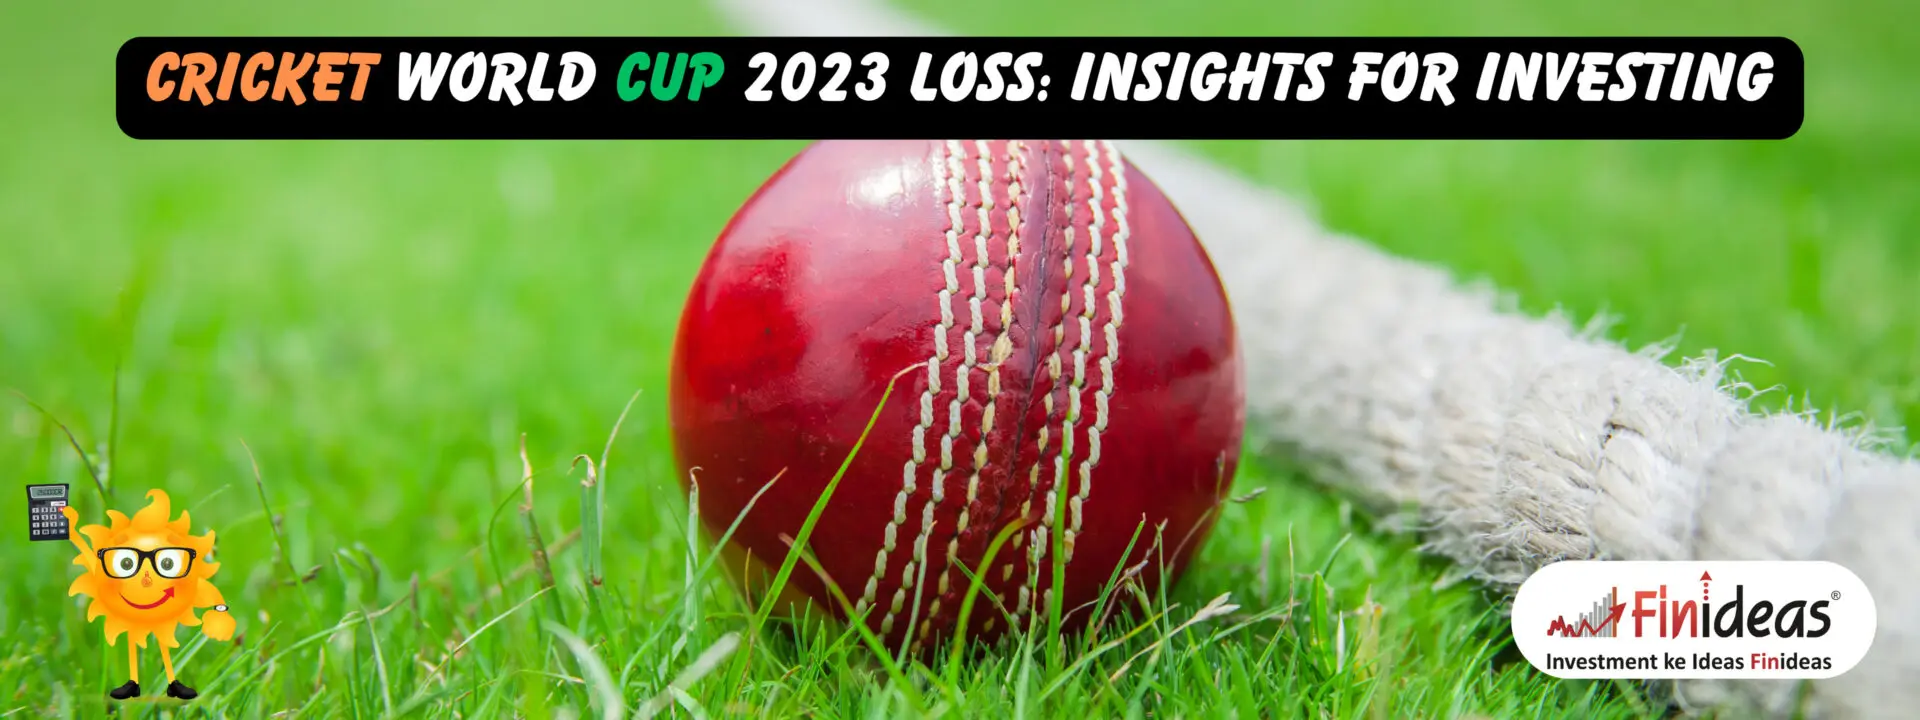 9 unique investing lessons from ICC Cricket World Cup 2023